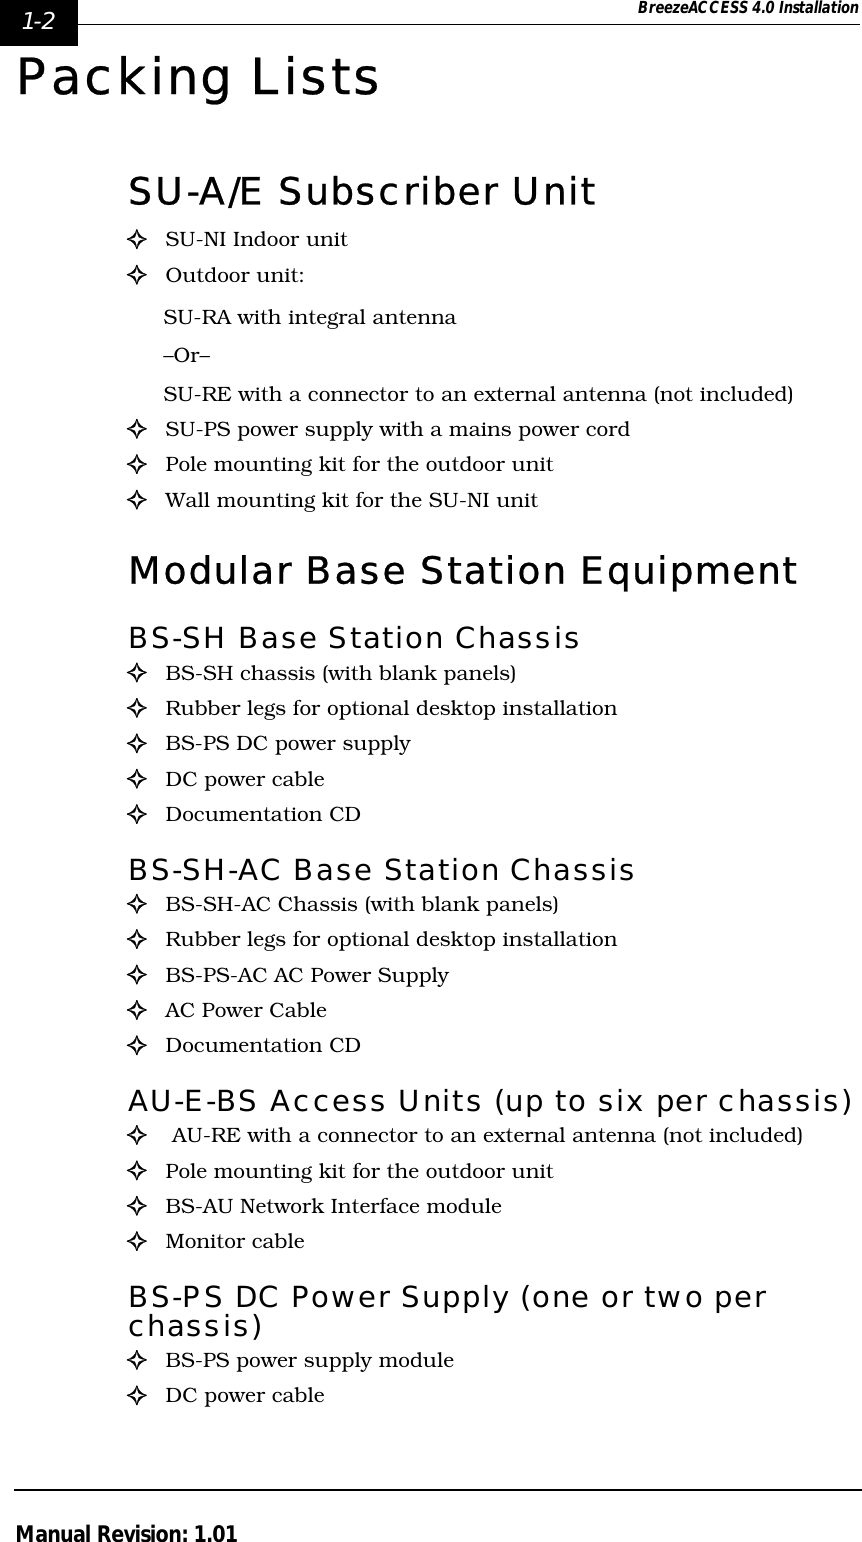 1-2 BreezeACCESS 4.0 InstallationManual Revision: 1.01Packing ListsSU-A/E Subscriber Unit!SU-NI Indoor unit !Outdoor unit:SU-RA with integral antenna–Or–SU-RE with a connector to an external antenna (not included)!SU-PS power supply with a mains power cord!Pole mounting kit for the outdoor unit!Wall mounting kit for the SU-NI unitModular Base Station EquipmentBS-SH Base Station Chassis!BS-SH chassis (with blank panels)!Rubber legs for optional desktop installation!BS-PS DC power supply!DC power cable!Documentation CDBS-SH-AC Base Station Chassis!BS-SH-AC Chassis (with blank panels)!Rubber legs for optional desktop installation!BS-PS-AC AC Power Supply!AC Power Cable!Documentation CDAU-E-BS Access Units (up to six per chassis)! AU-RE with a connector to an external antenna (not included)!Pole mounting kit for the outdoor unit!BS-AU Network Interface module!Monitor cableBS-PS DC Power Supply (one or two per chassis)!BS-PS power supply module!DC power cable